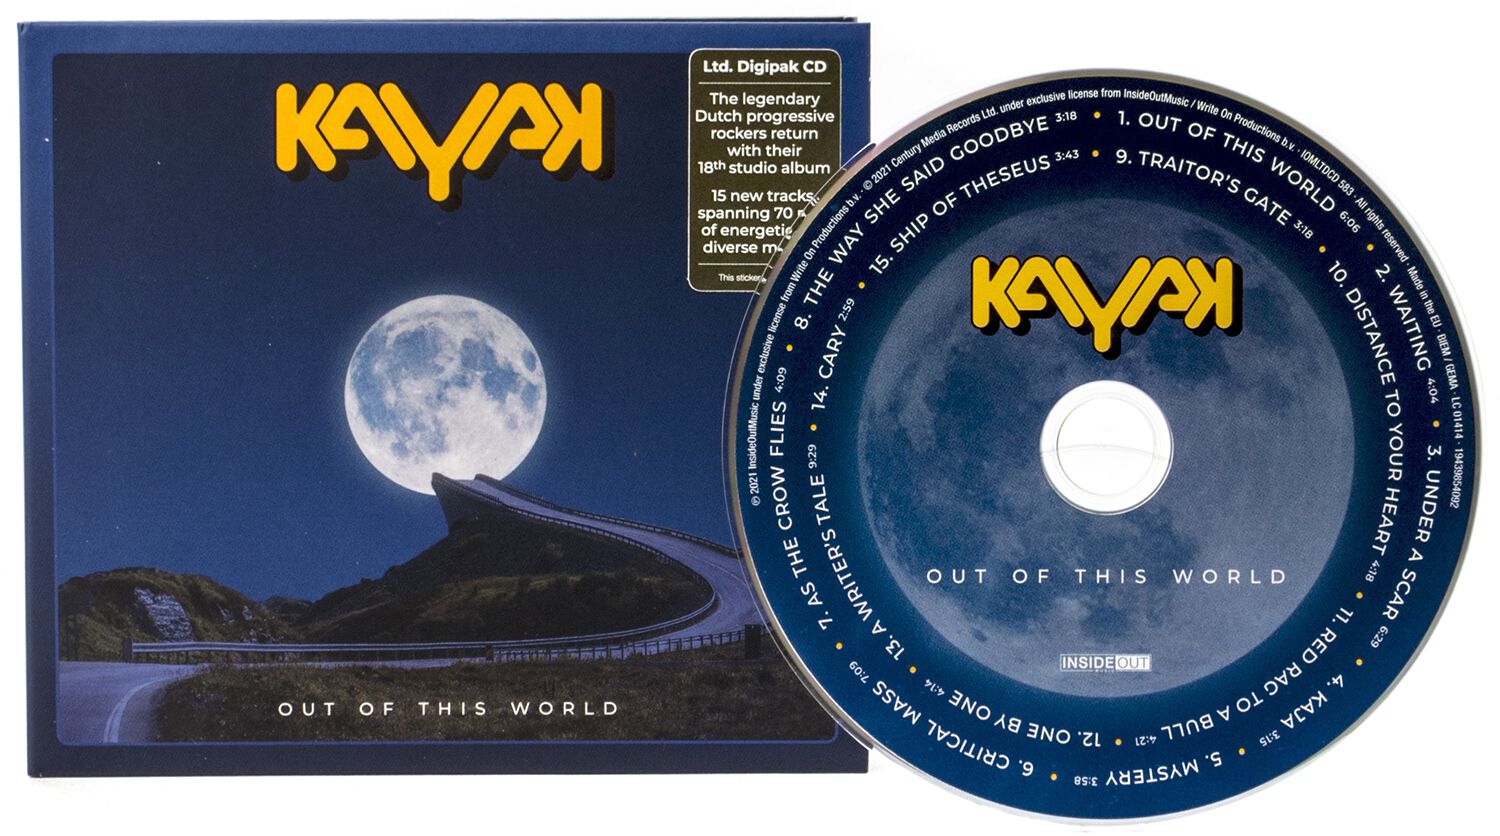 Image of Kayak Out of this world CD Standard